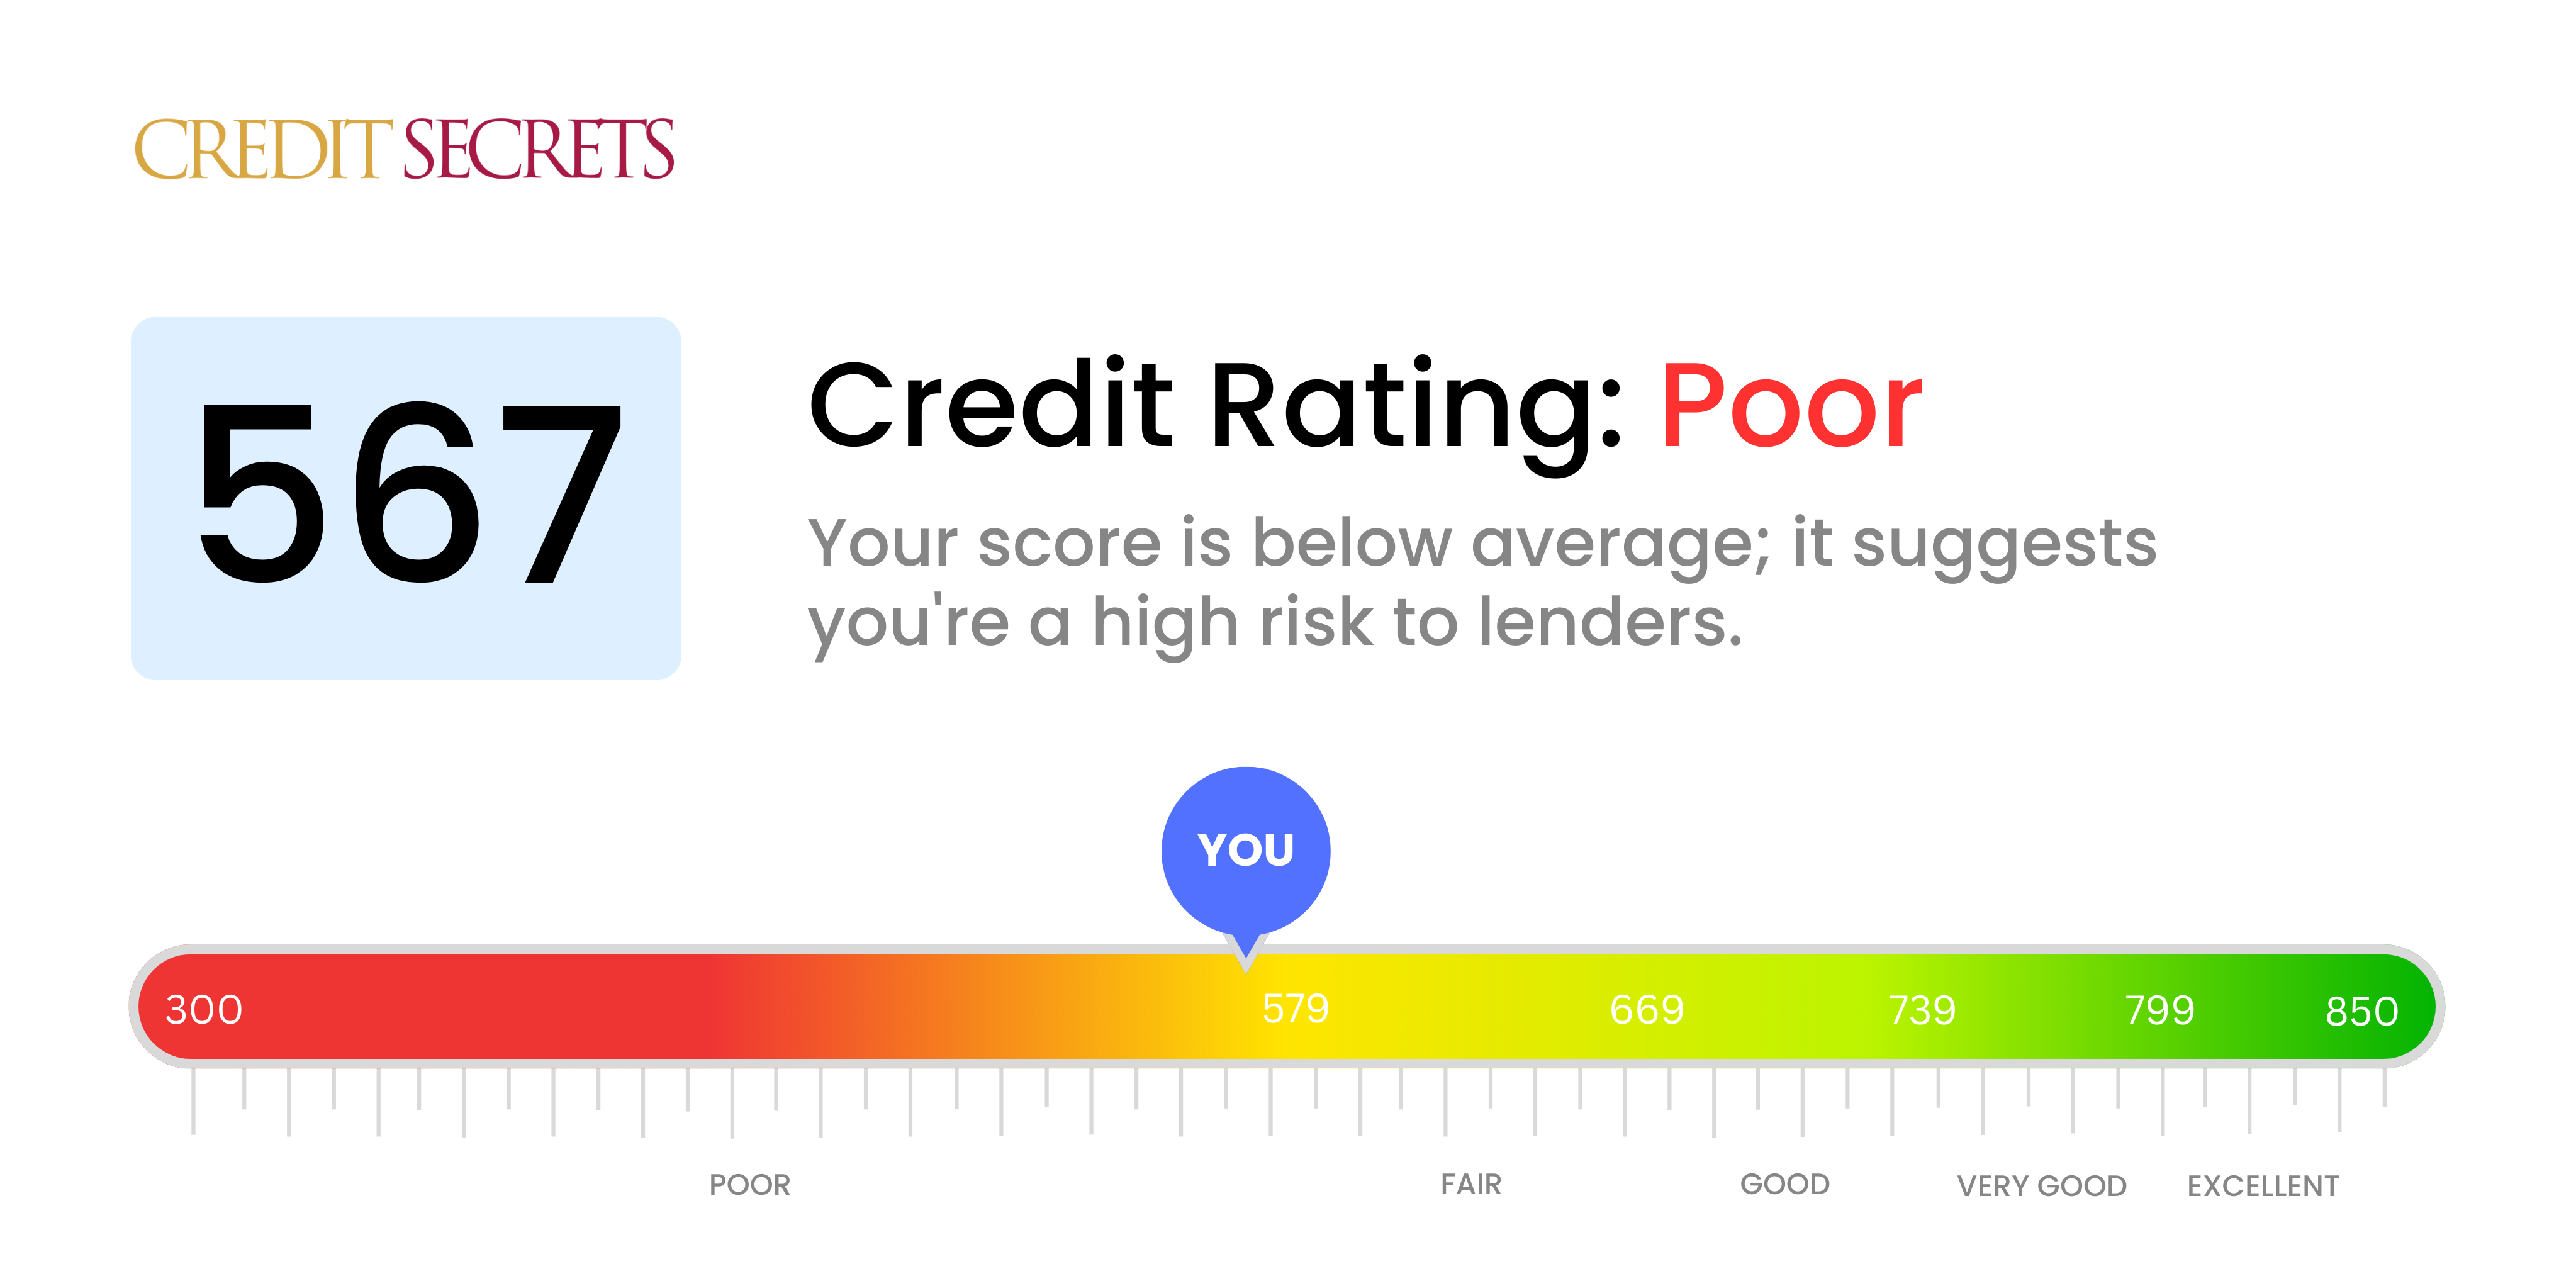 Is 567 a good credit score?